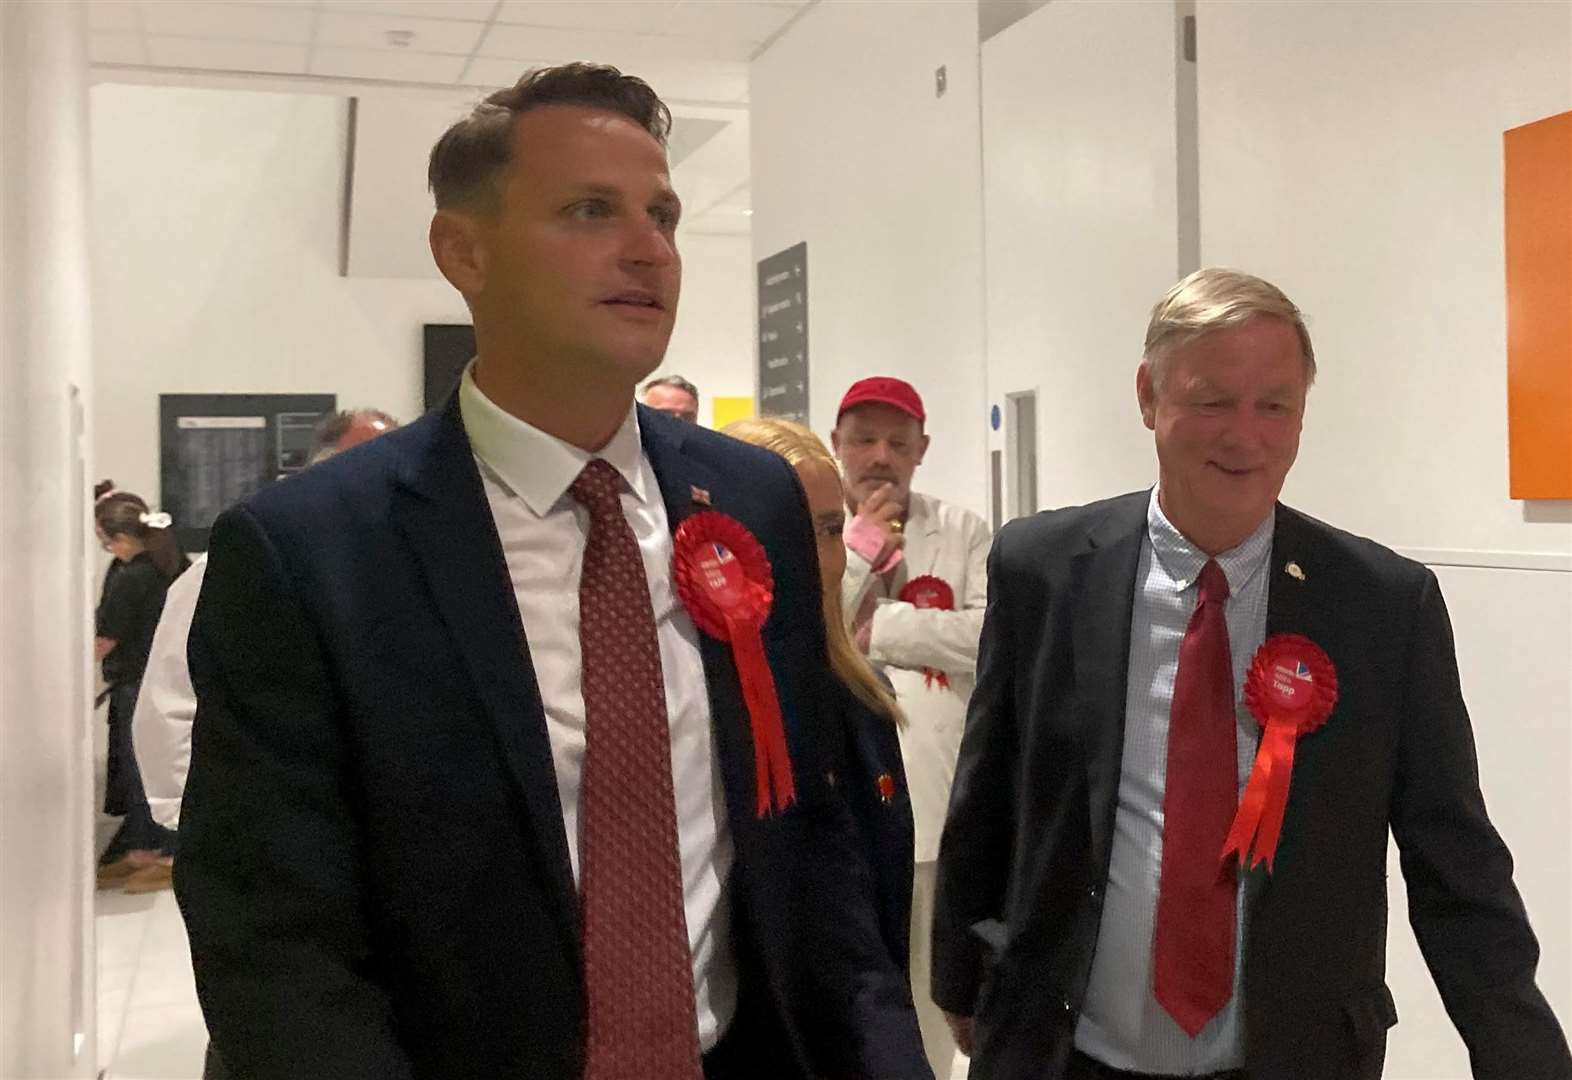 Labour candidate Mike Tapp arrives to the Dover and Deal count